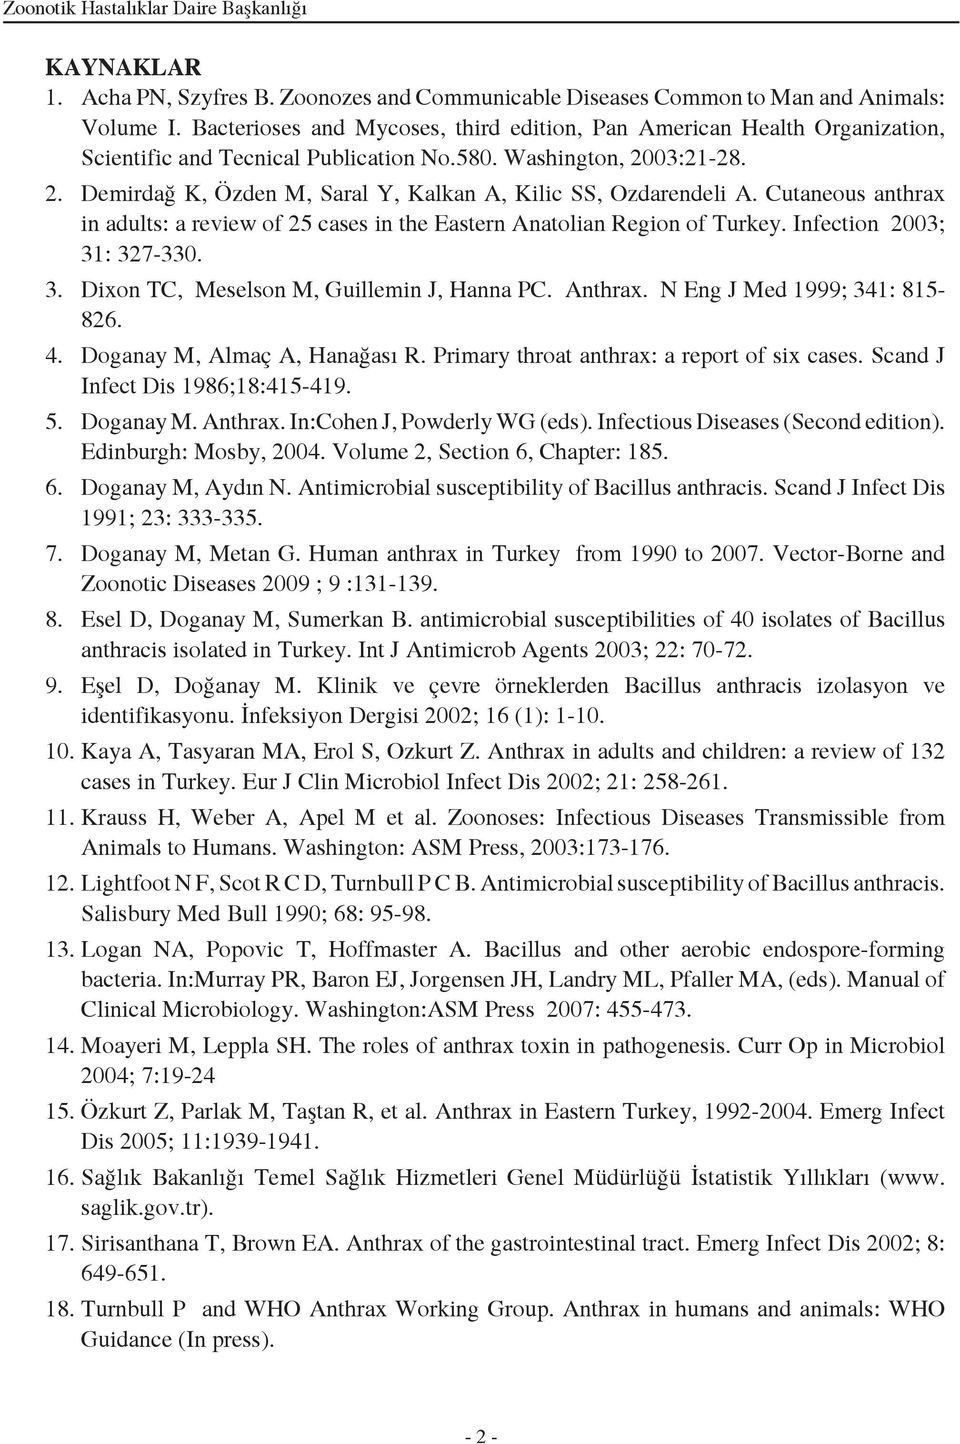 Cutaneous anthrax in adults: a review of 25 cases in the Eastern Anatolian Region of Turkey. Infection 2003; 31: 327-330. 3. Dixon TC, Meselson M, Guillemin J, Hanna PC. Anthrax.